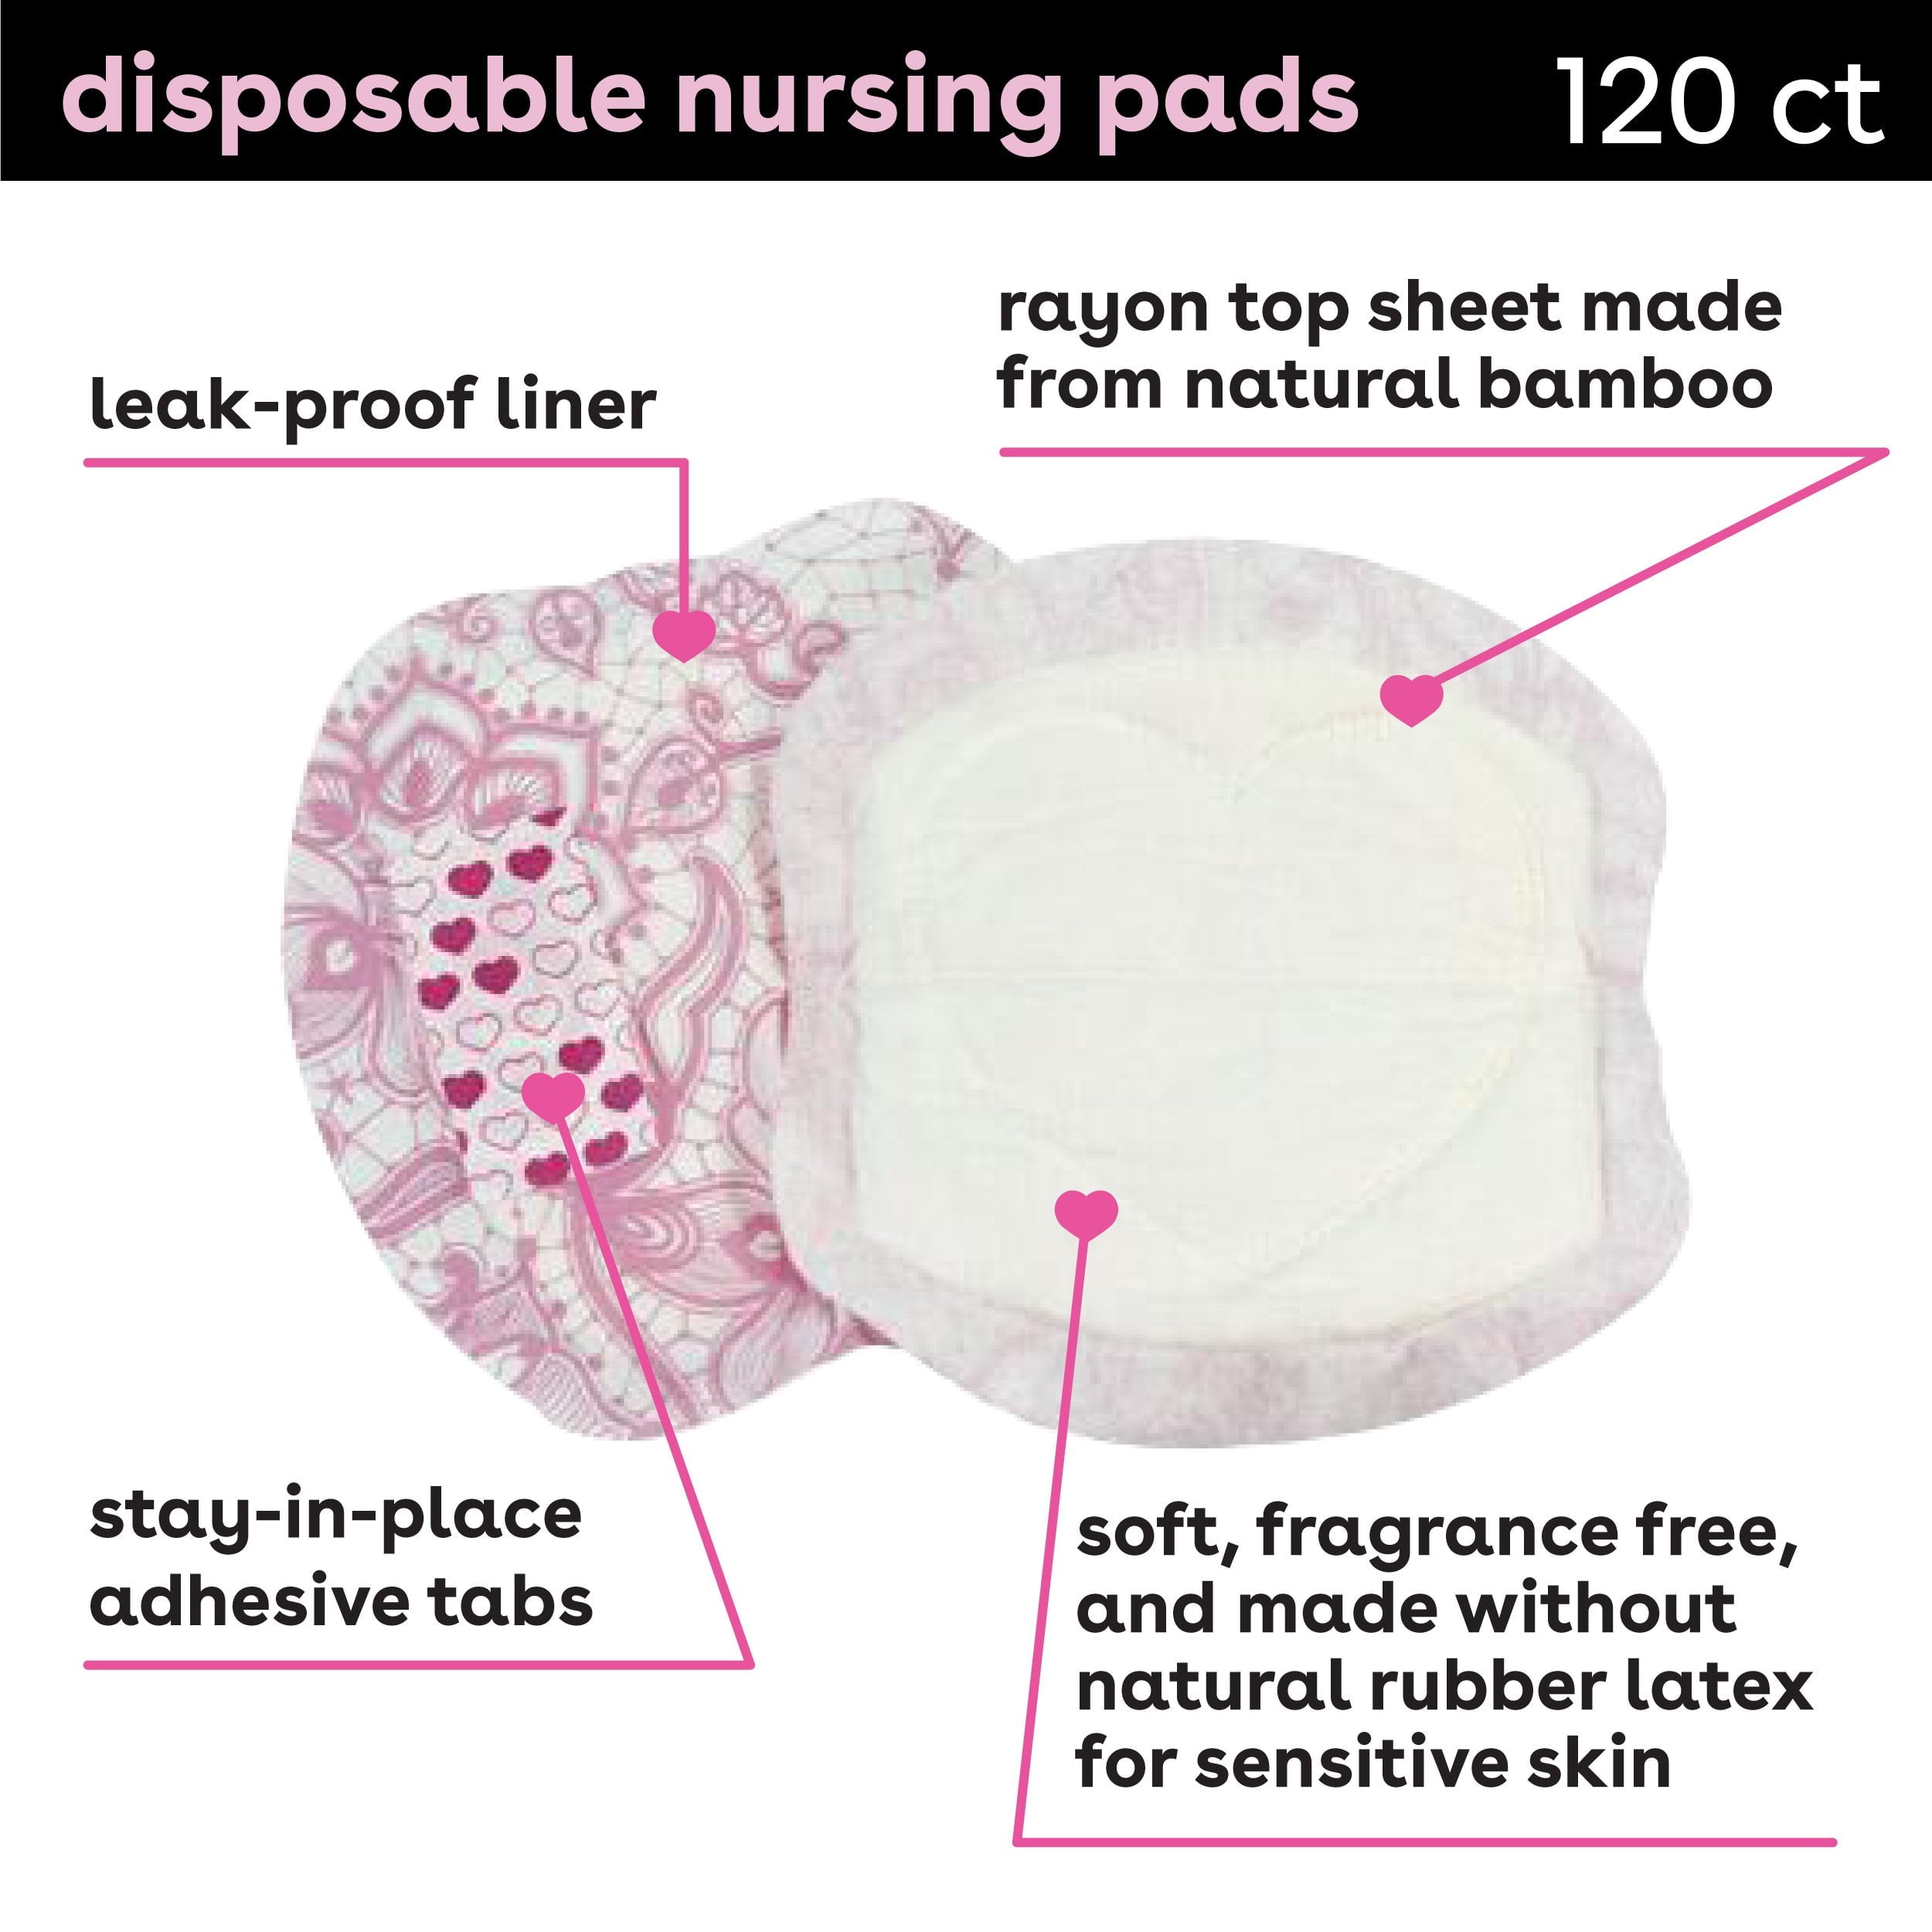 Momcozy Super Soft Disposable Nursing Pads 120 Count, Breast Pads for  Breastfeeding 